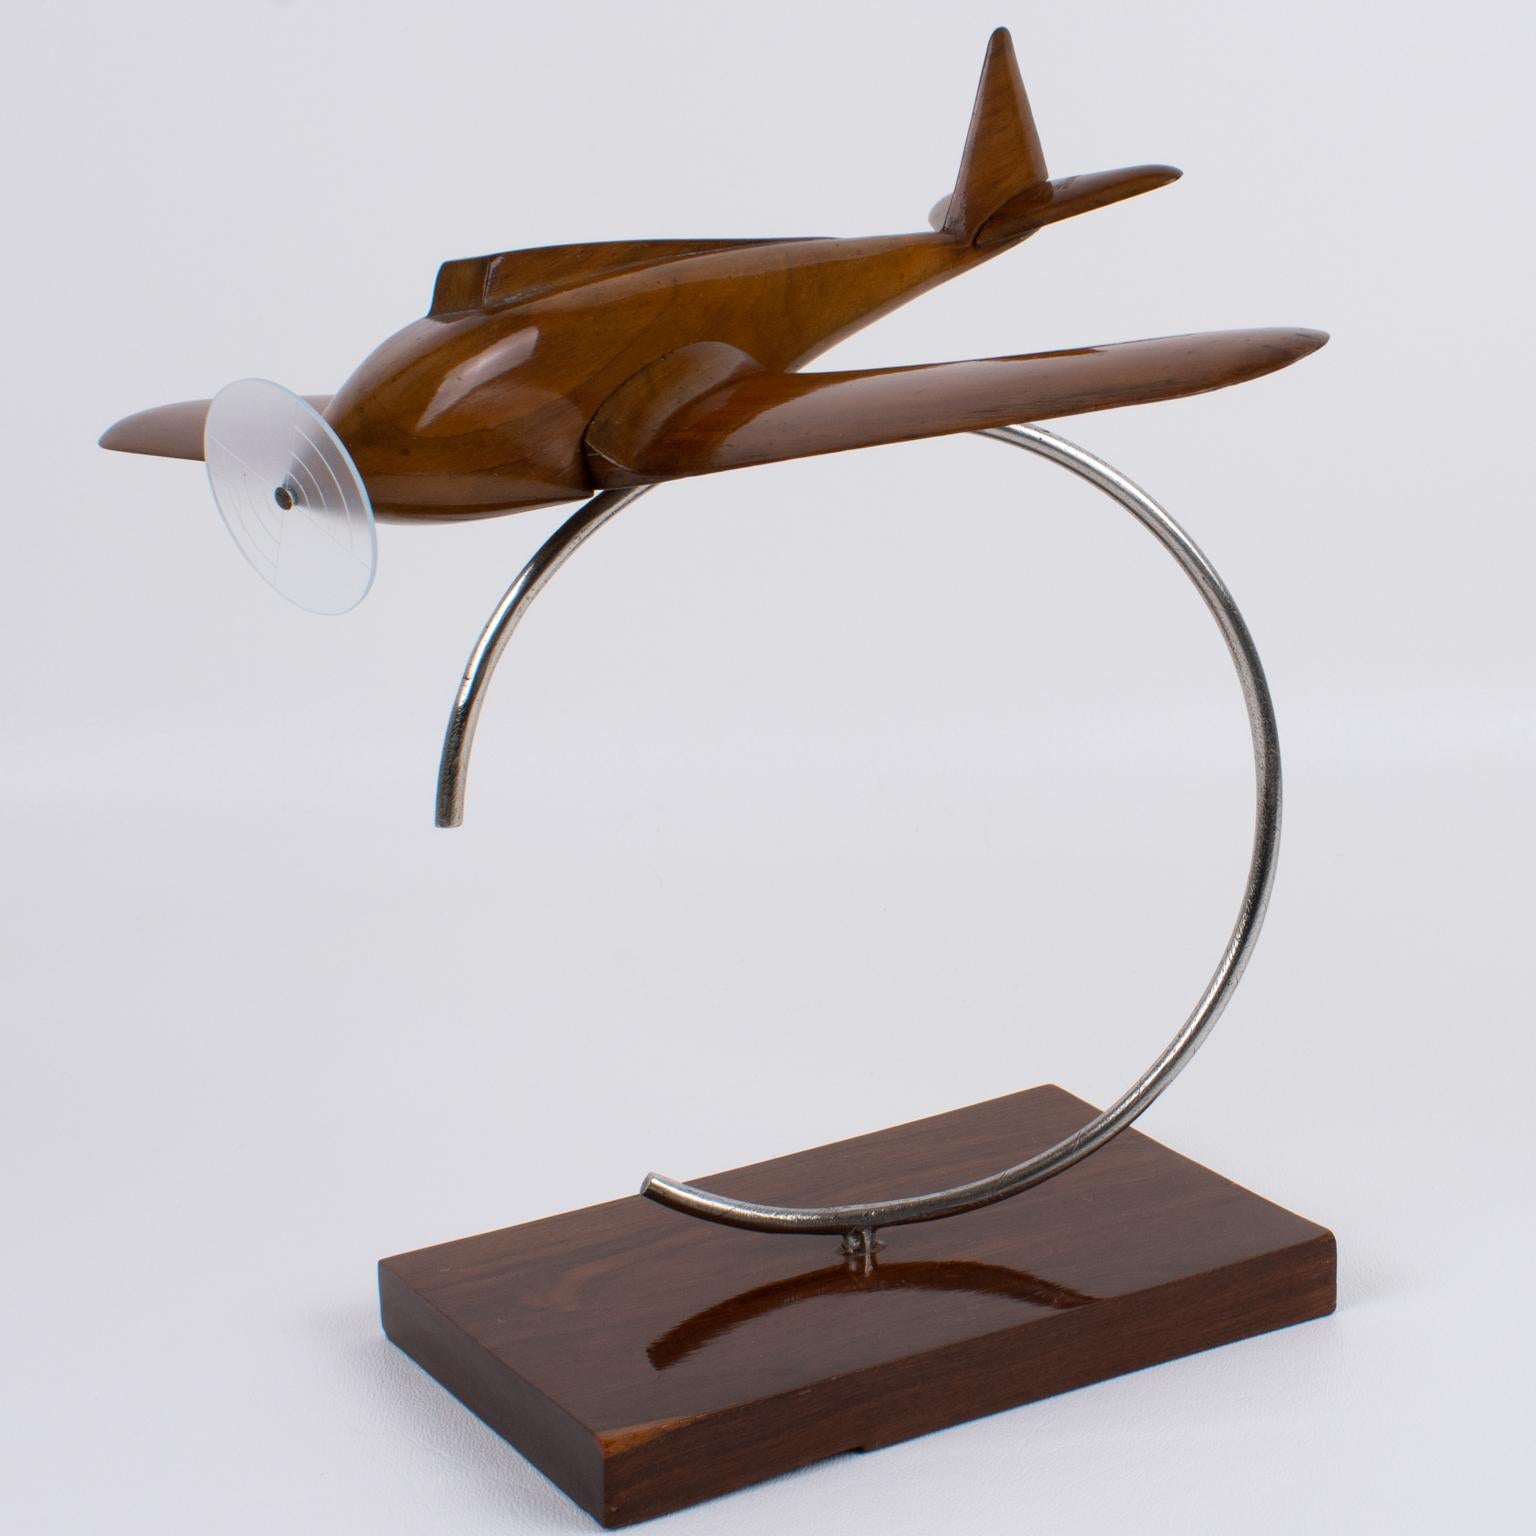 Art Deco Wood and Metal Airplane Aviation Propeller Model, France 1930s For Sale 9